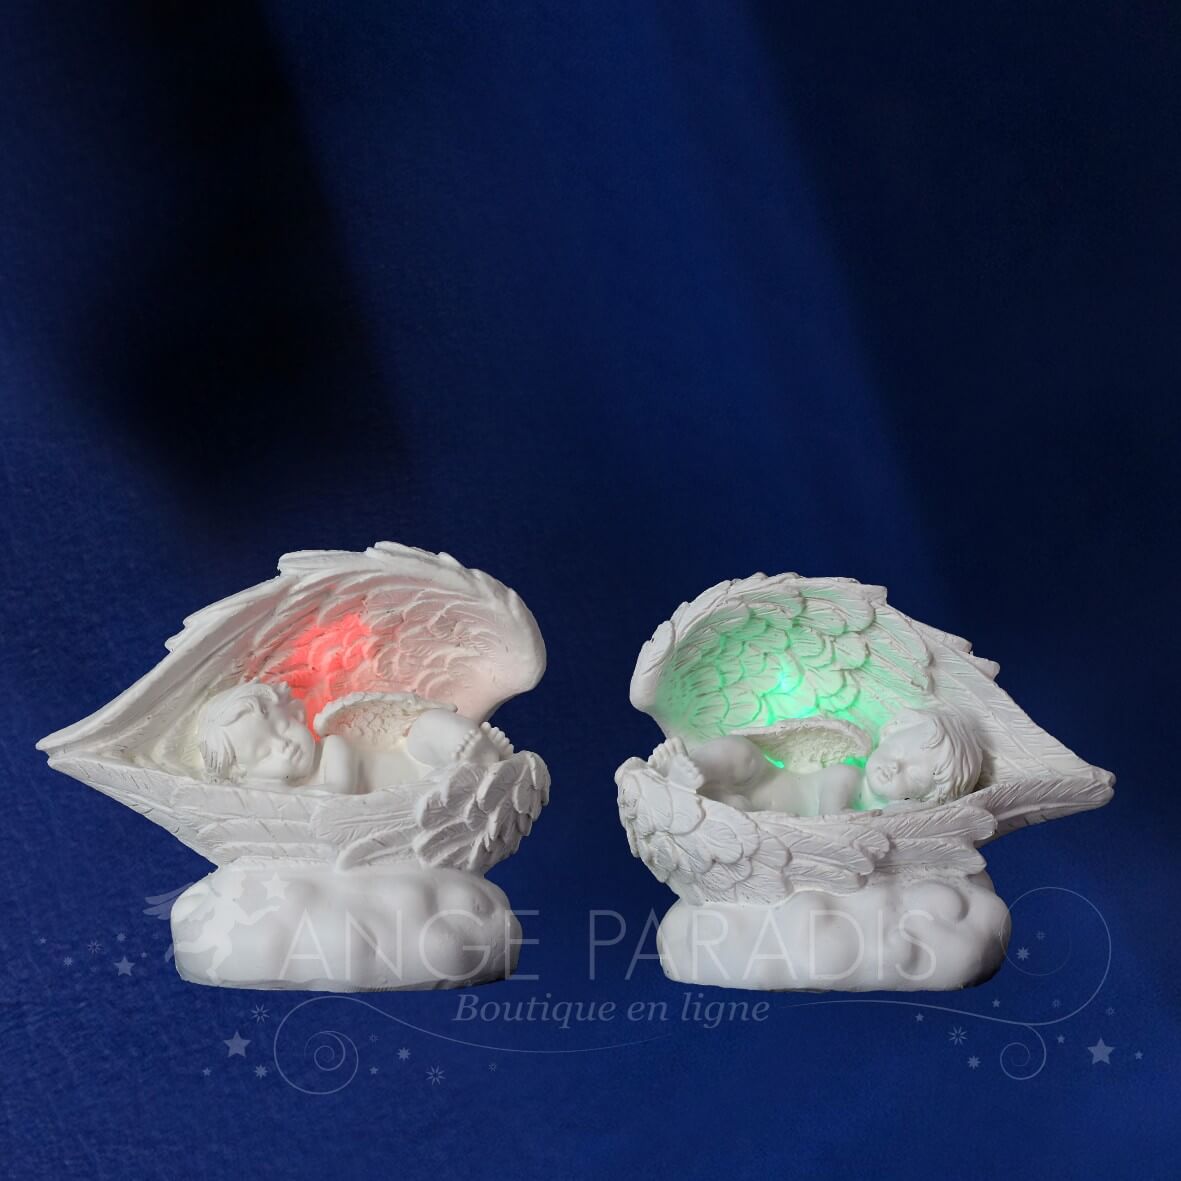 2 FIGURINES ANGES LUMINEUX APAISANT